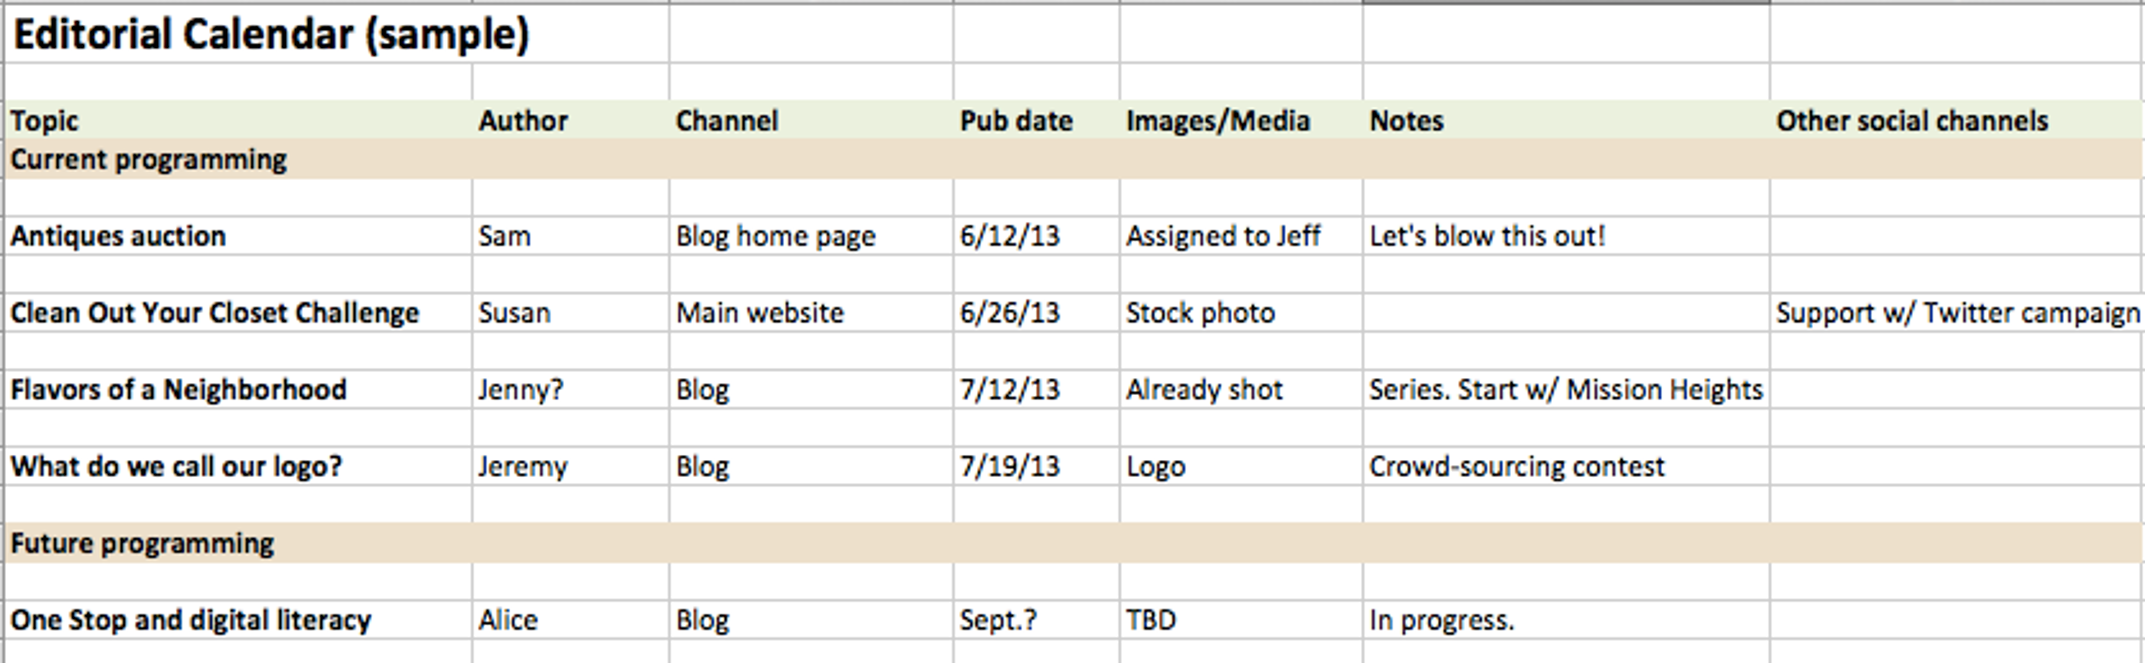 A sample editorial calendar in a spreadsheet. It identifies topics, dates, channels, etc.